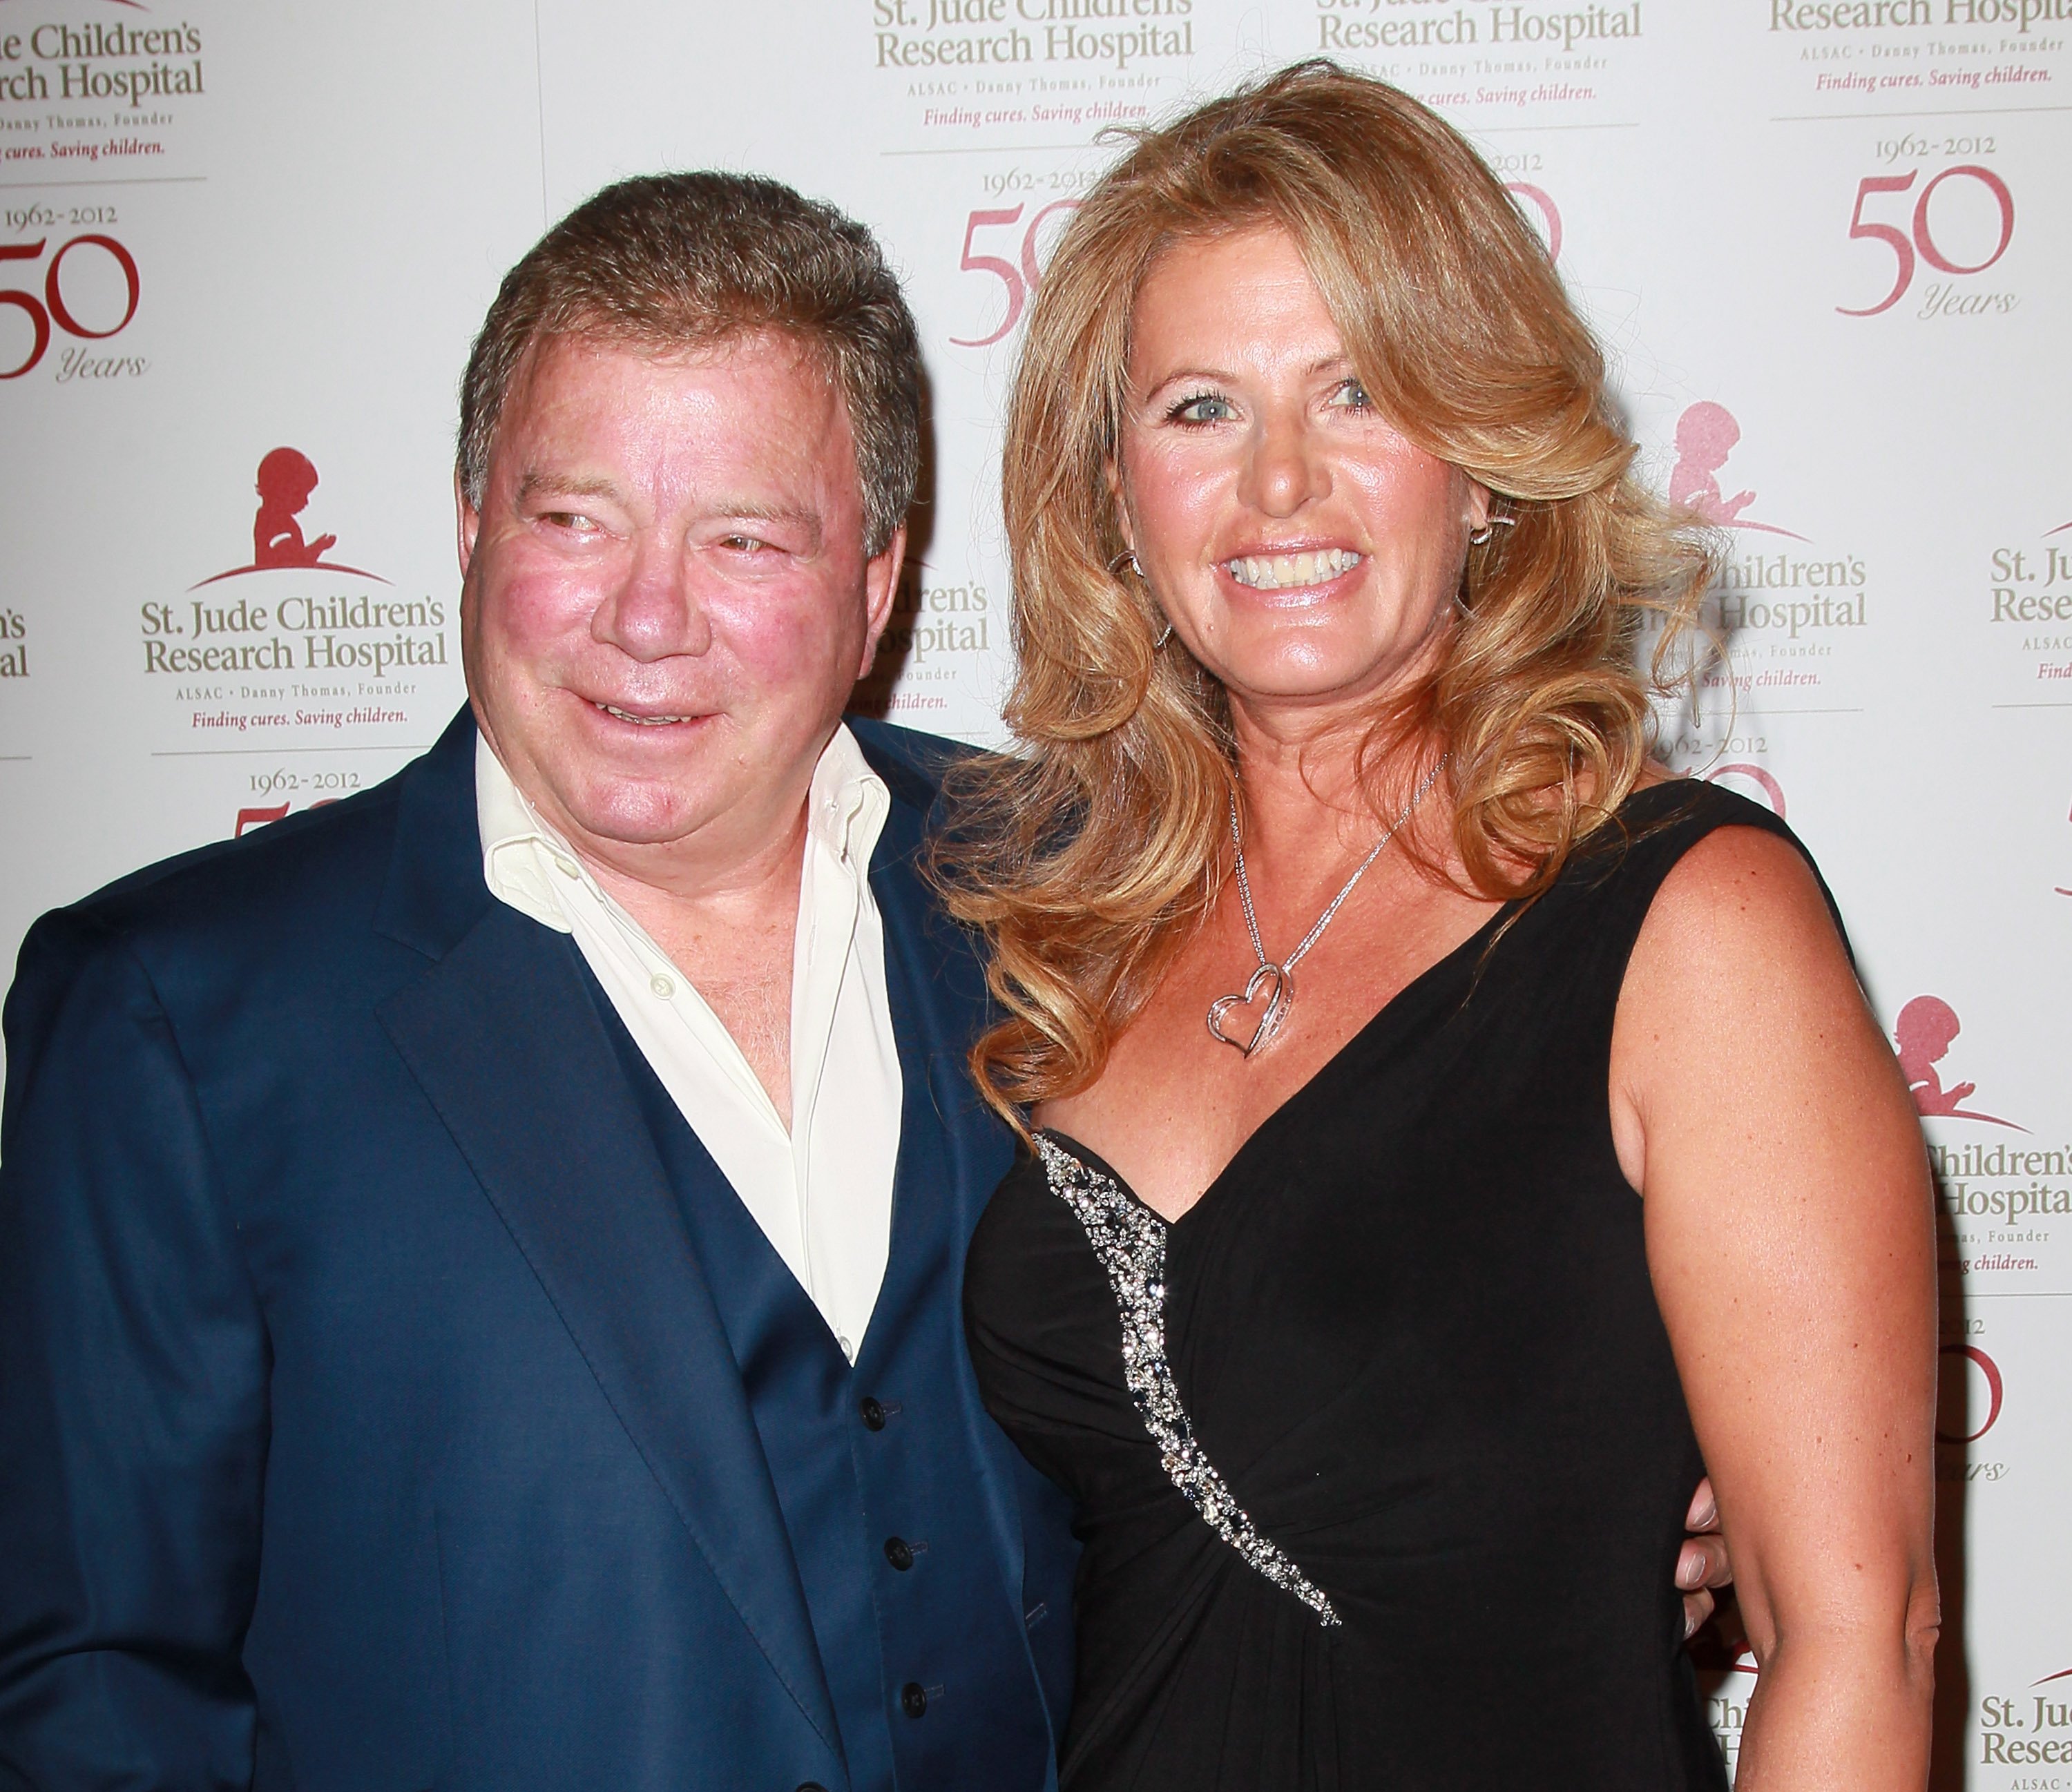 Actor William Shatner (L) and wife Elizabeth Shatner attend the 50th anniversary celebration for St. Jude Children's Research Hospital at The Beverly Hilton hotel on January 7, 2012, in Beverly Hills, California. | Source: Getty Images